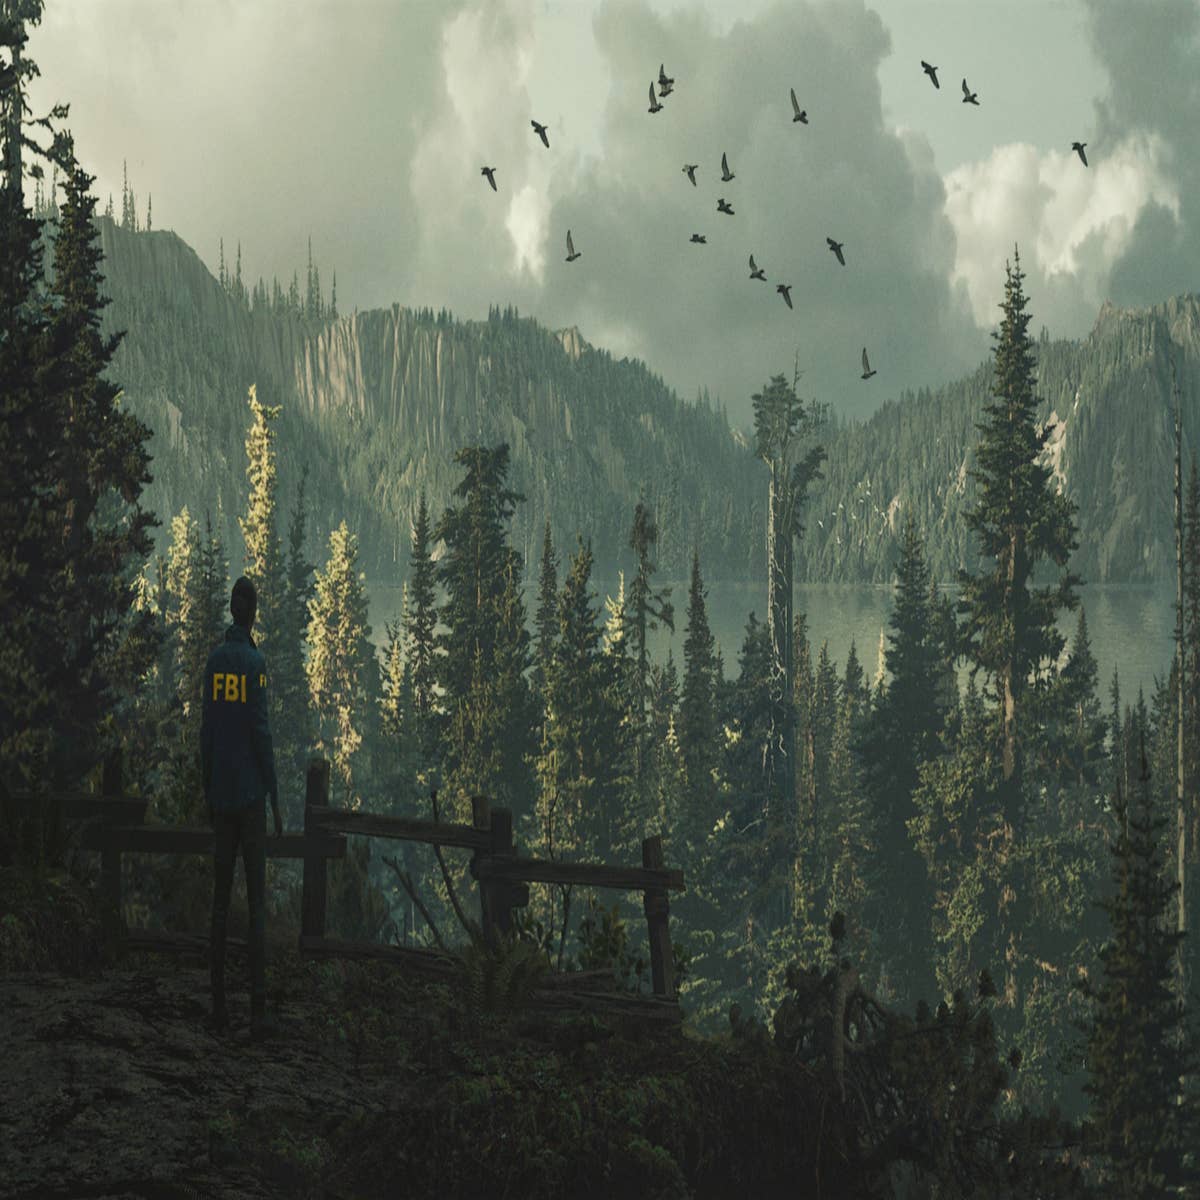 Alan Wake 2's final PC requirements are from out of this world